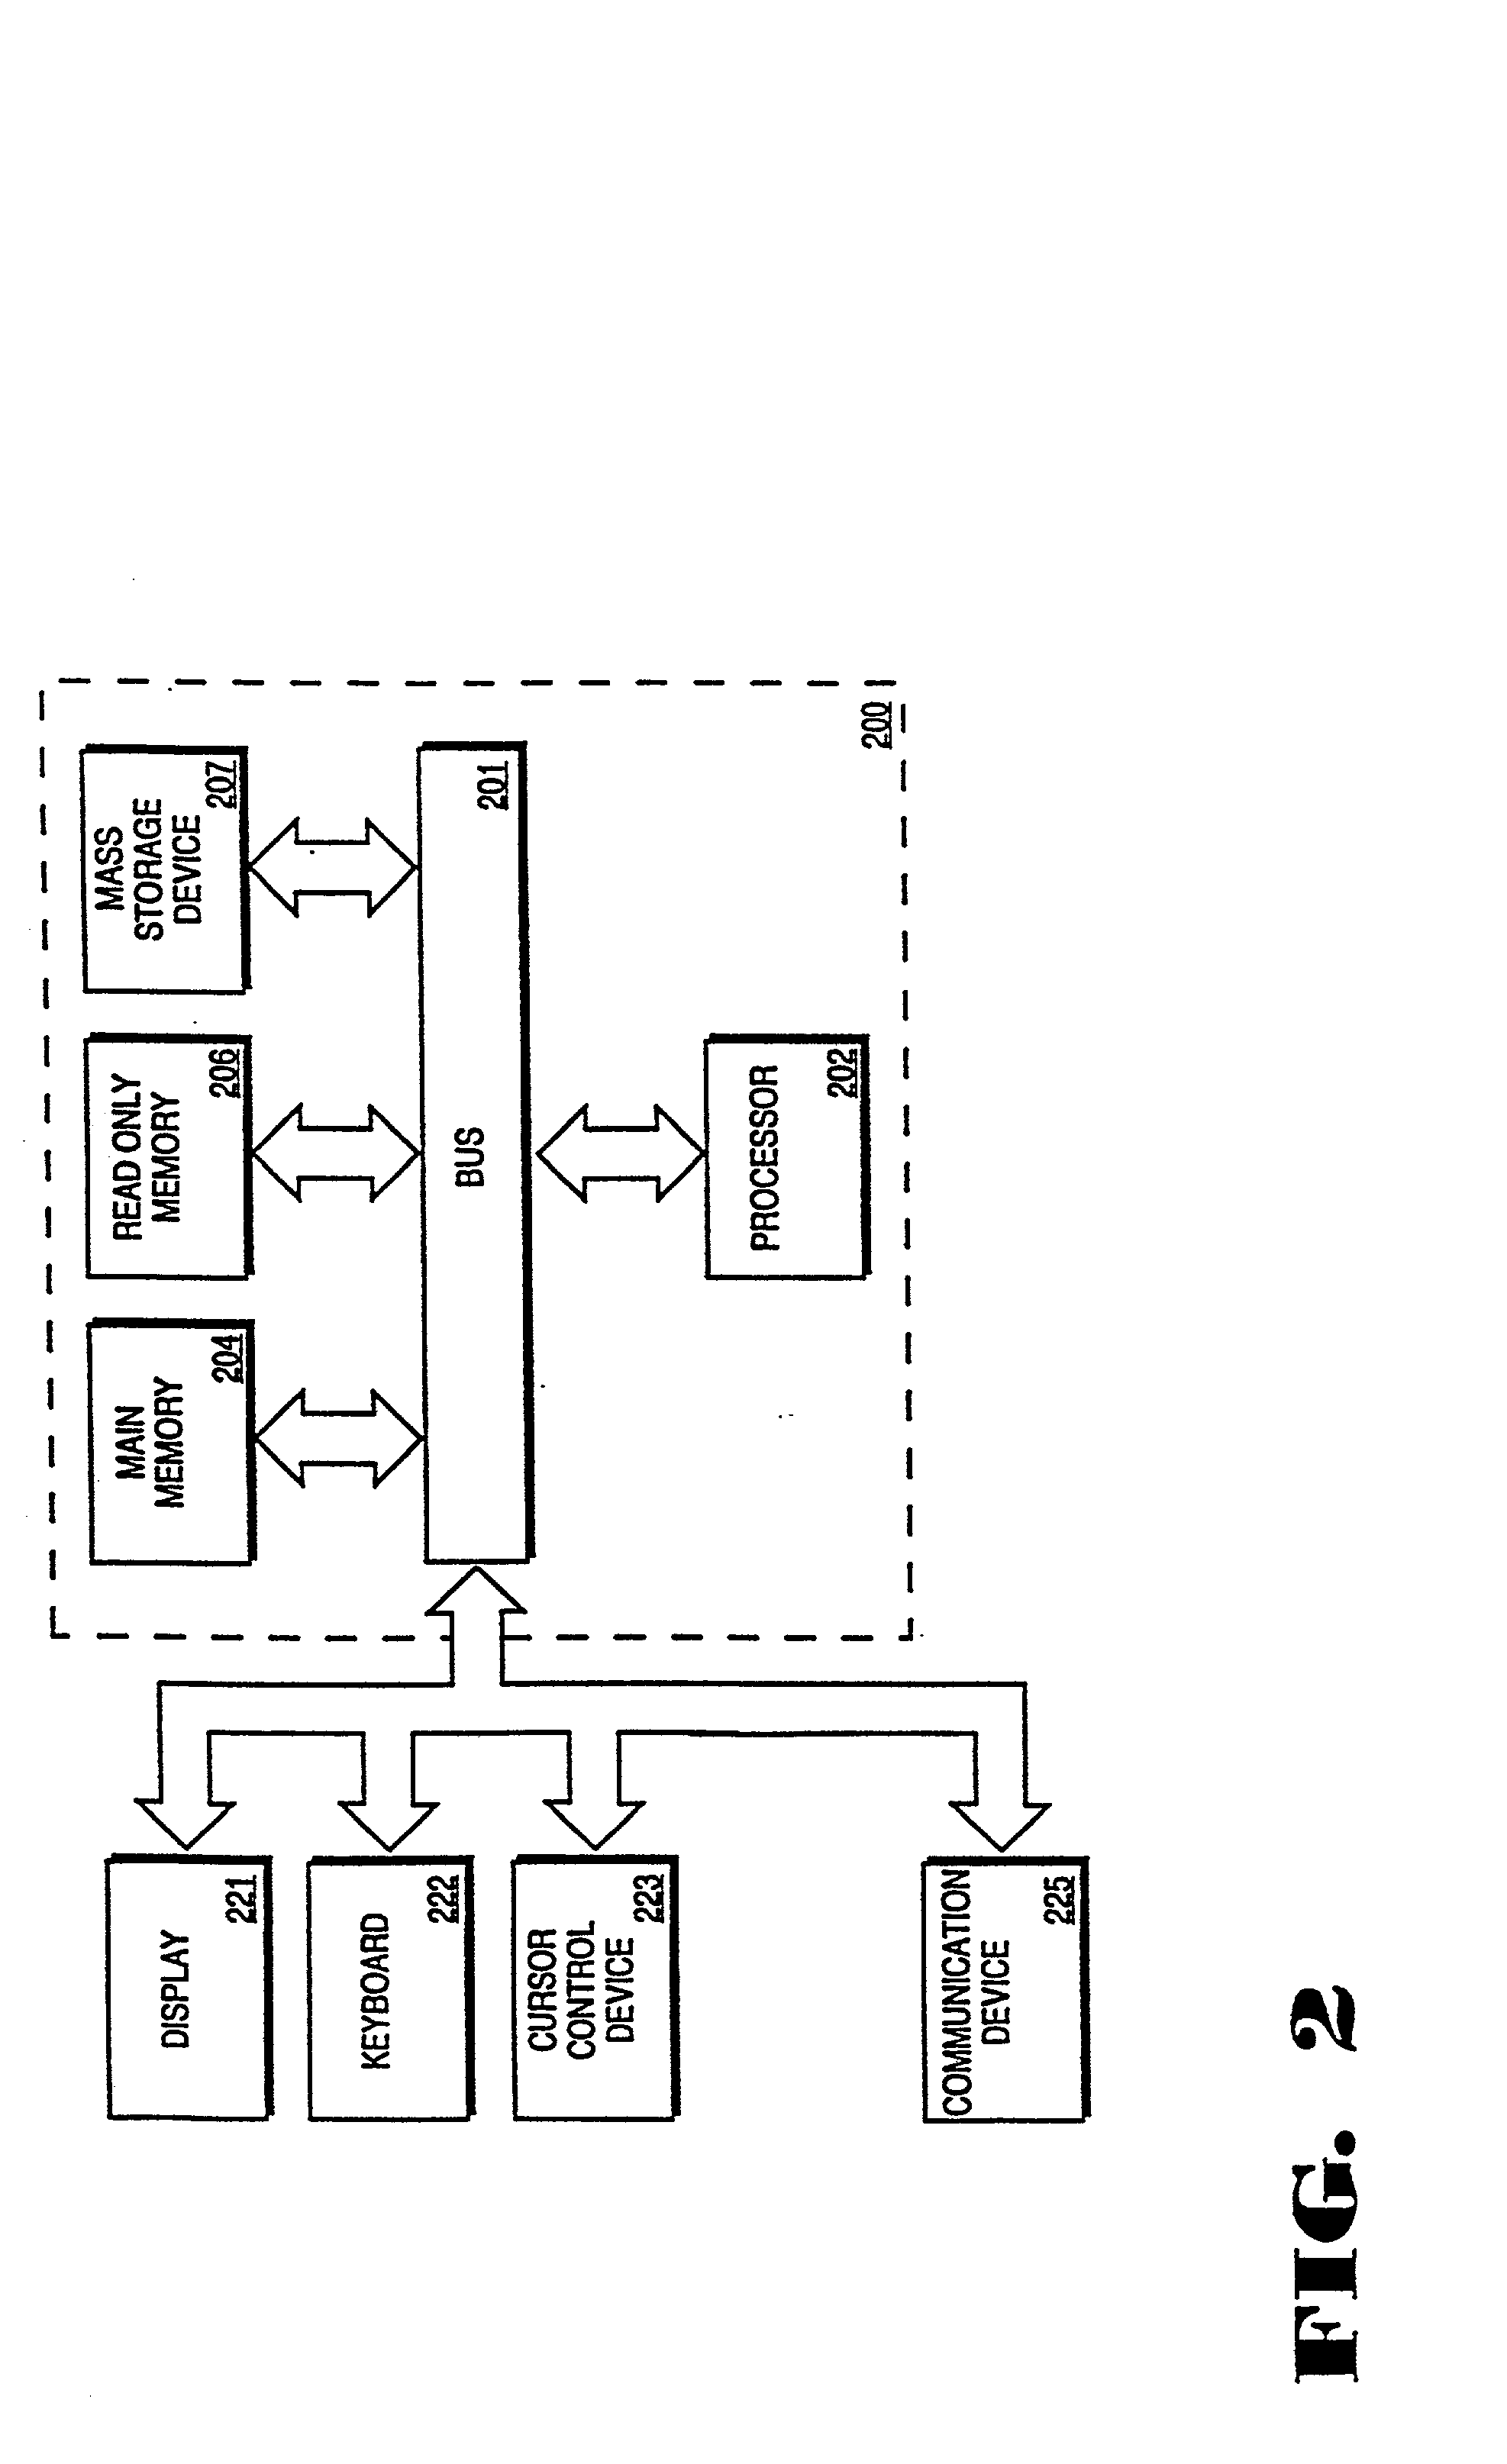 Method and apparatus for transmitting data over a network using a docking device